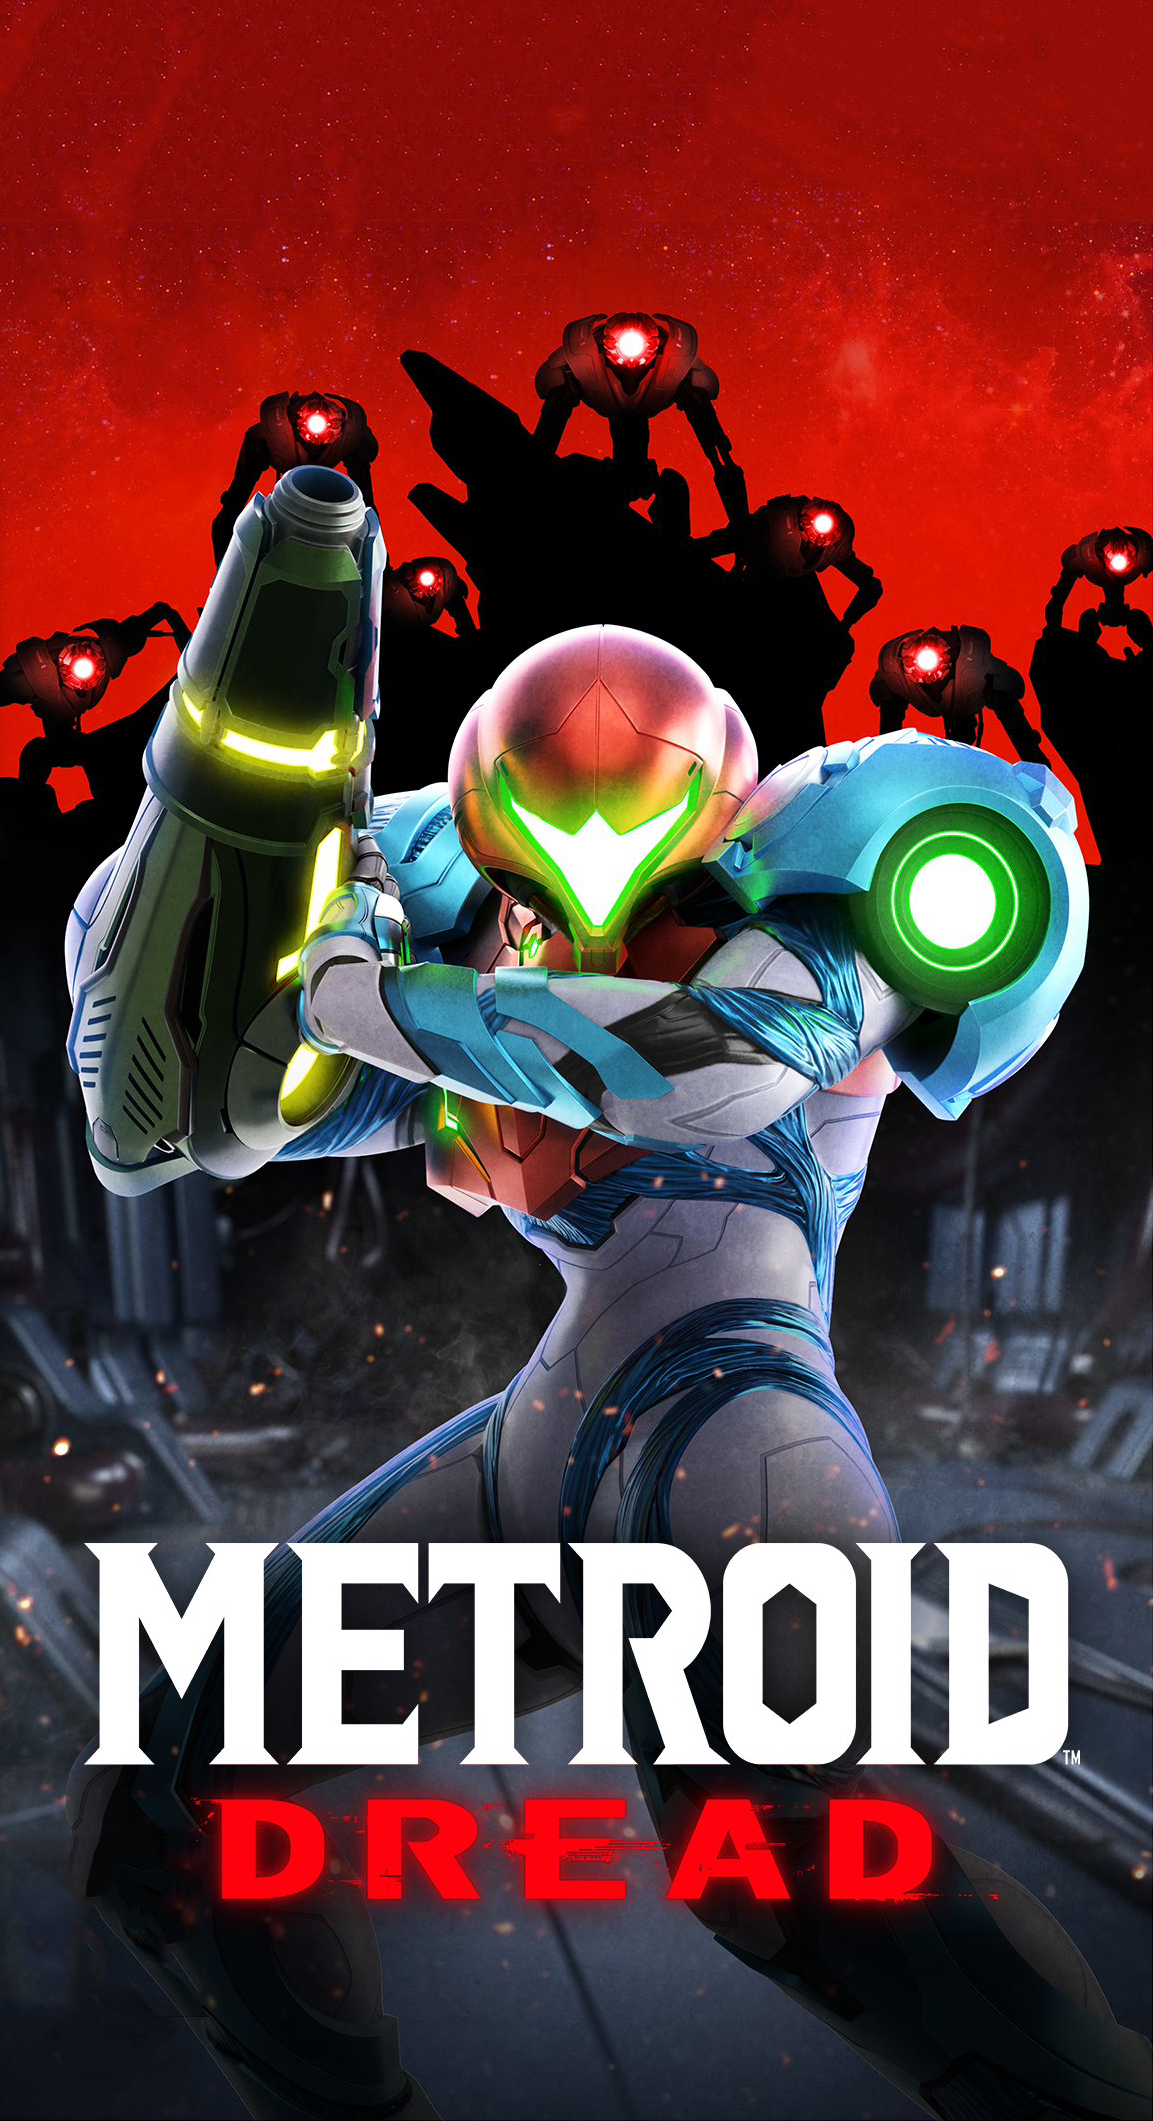 I photohopped a clean version of the Dread box art for phone wallpaper: Metroid